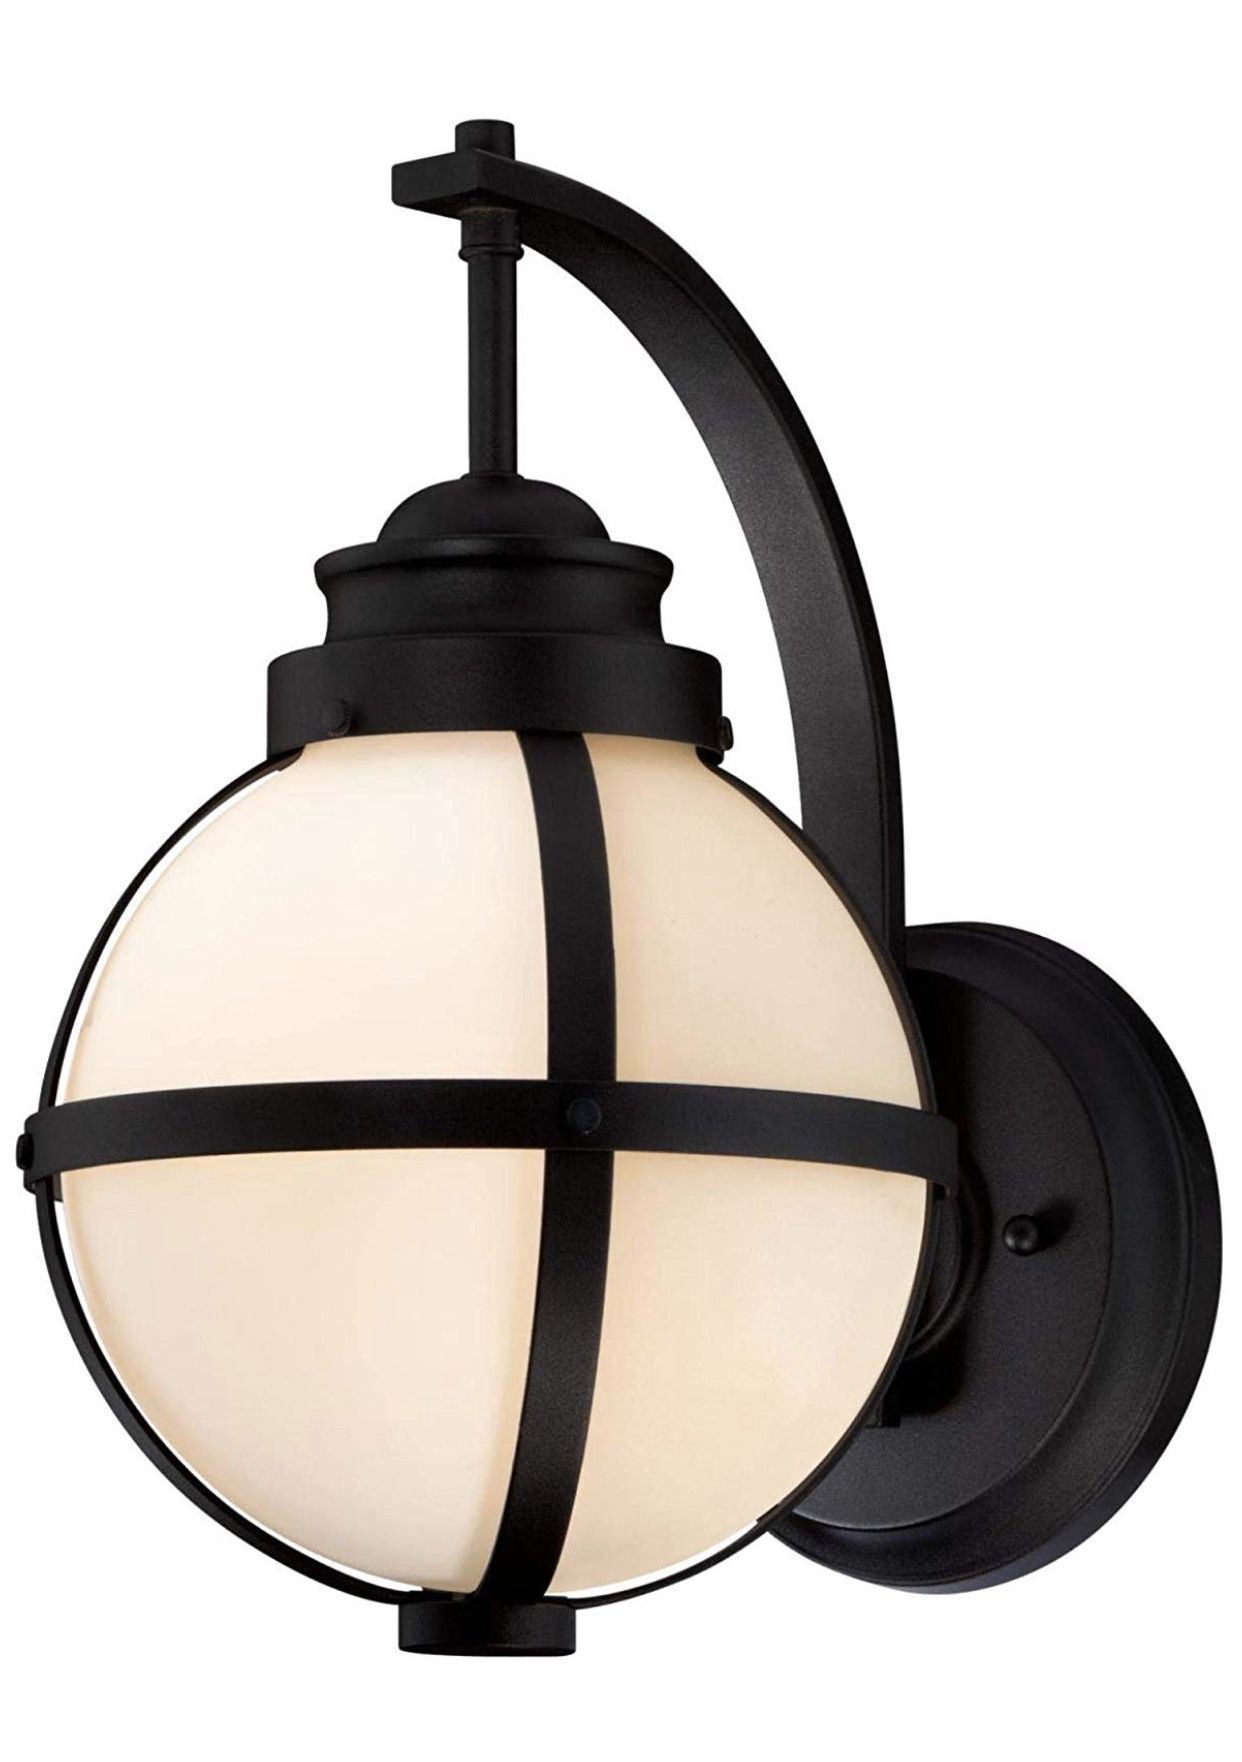 Foxport One-Light Outdoor Wall Fixture, Textured Black Finish with Frosted White Opal Glass